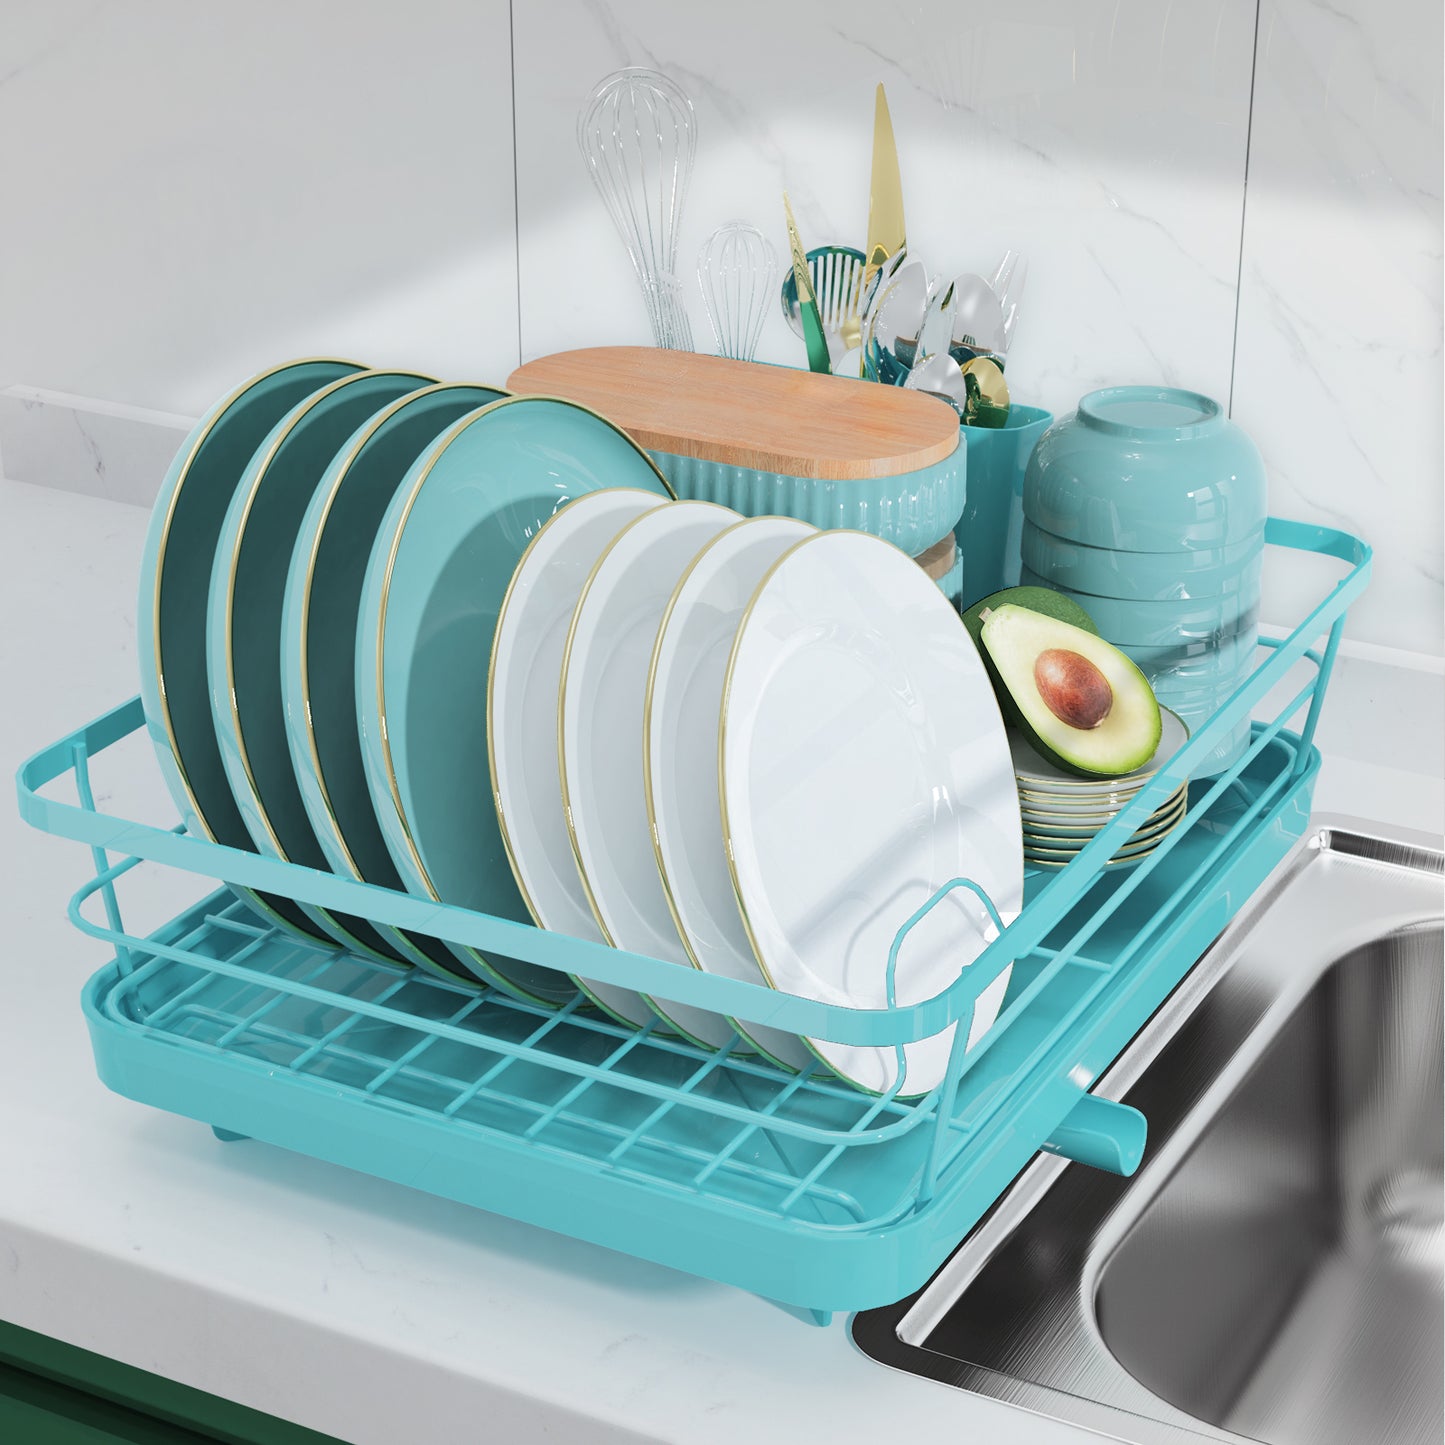  Sakugi Dish Drying Rack- 2-Layer Stainless Steel Dish Rack and  Drainboard Set with Drainage,ZZLJ5